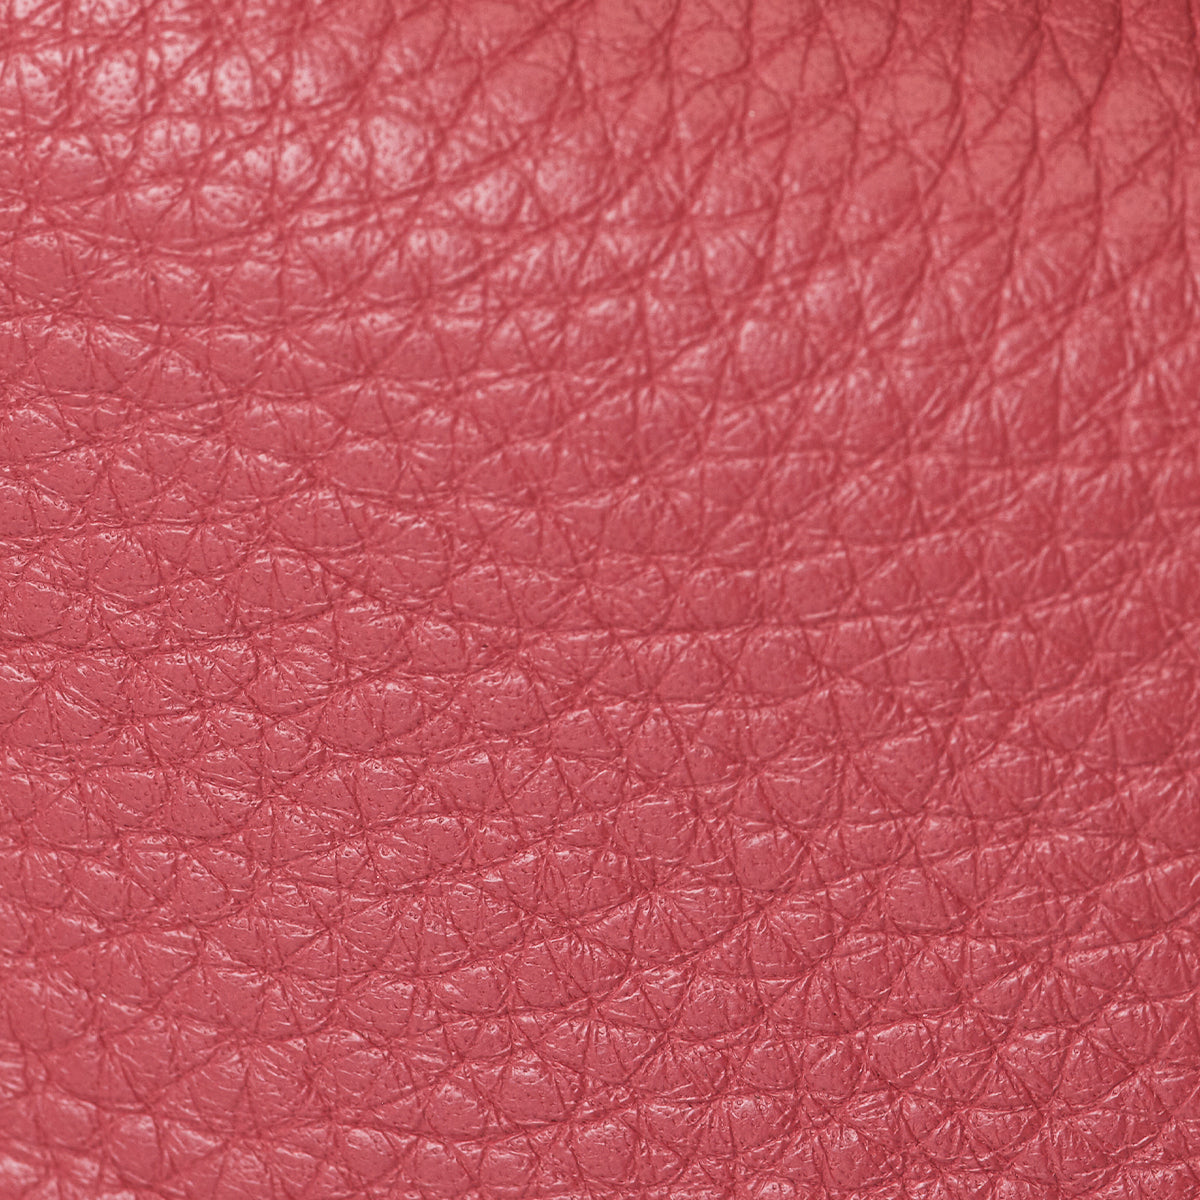 Kayce-Saddle-Med-Rouge-Pink-Leather-Swatch